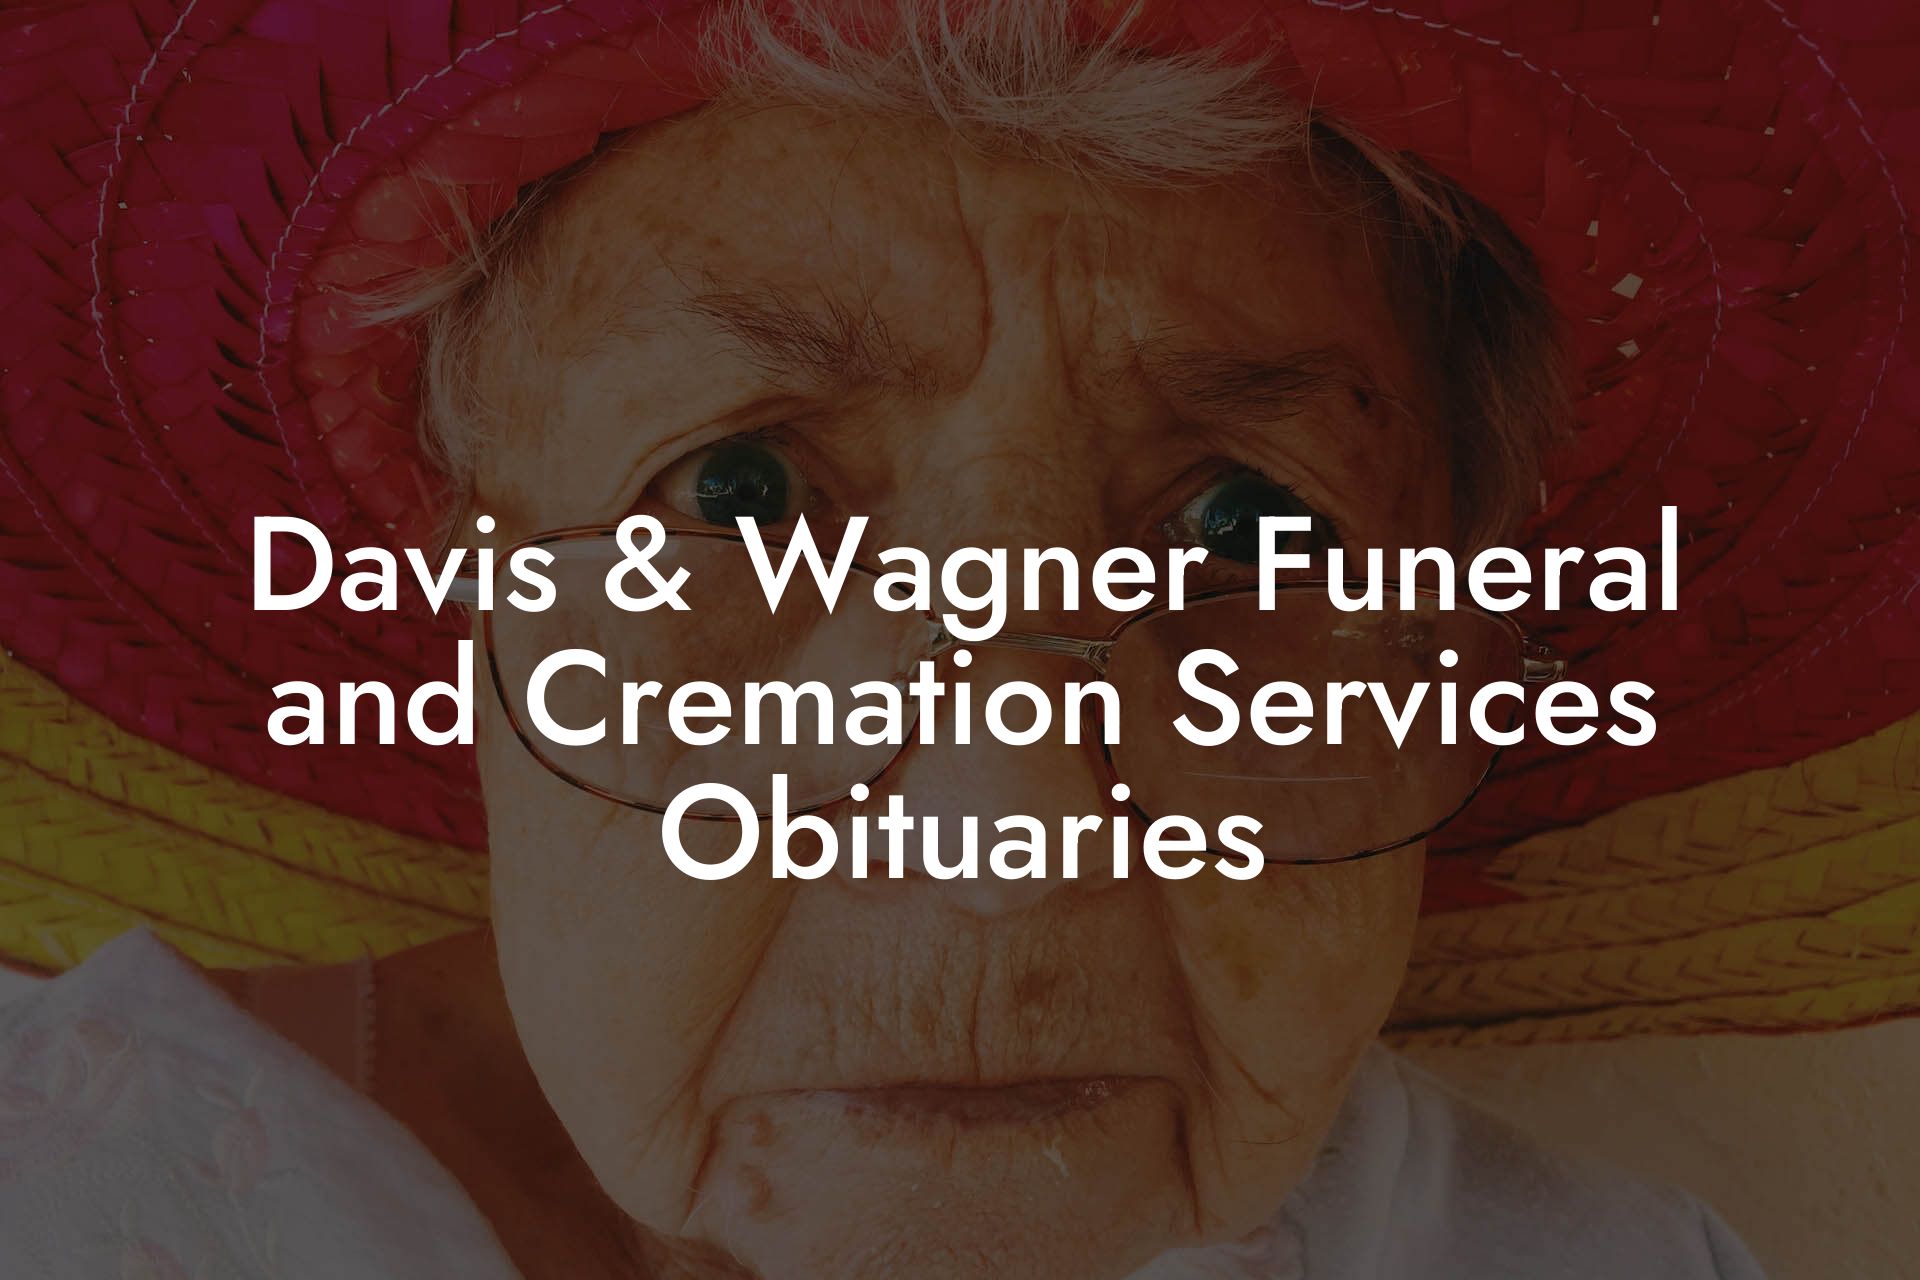 Davis & Wagner Funeral and Cremation Services Obituaries